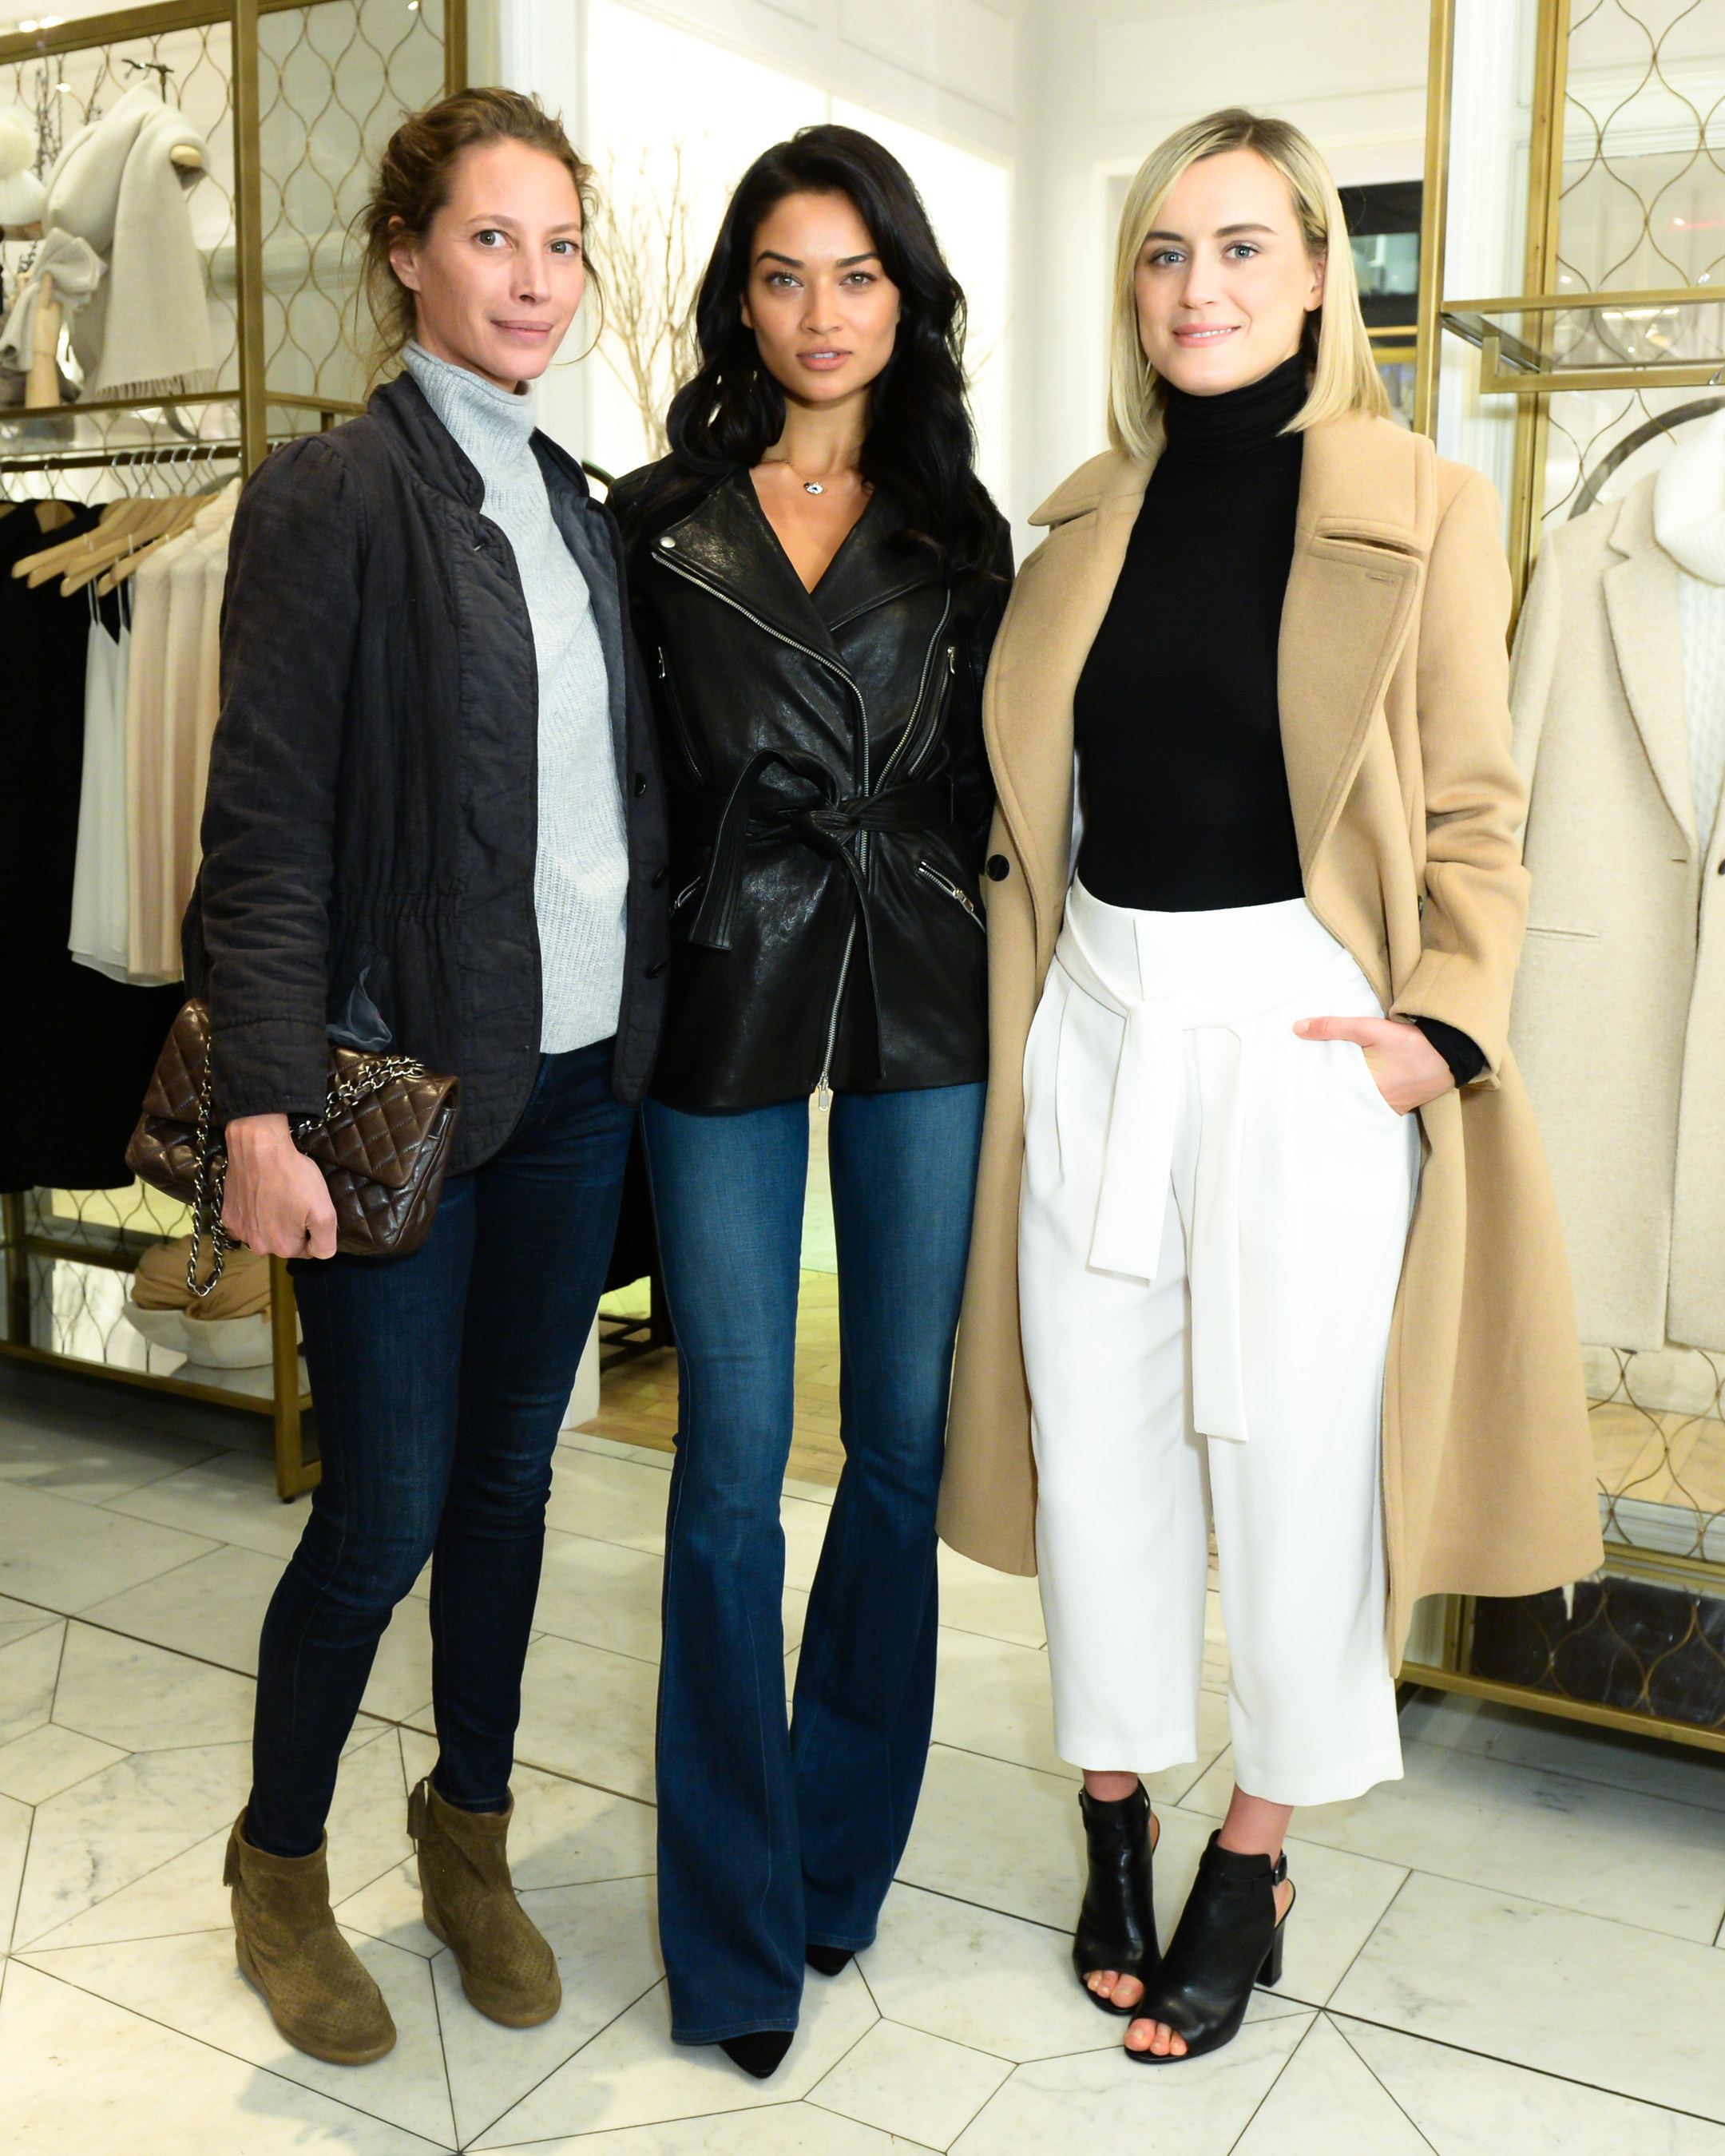 Club Monaco Celebrates Their First Lifestyle Store With Friends